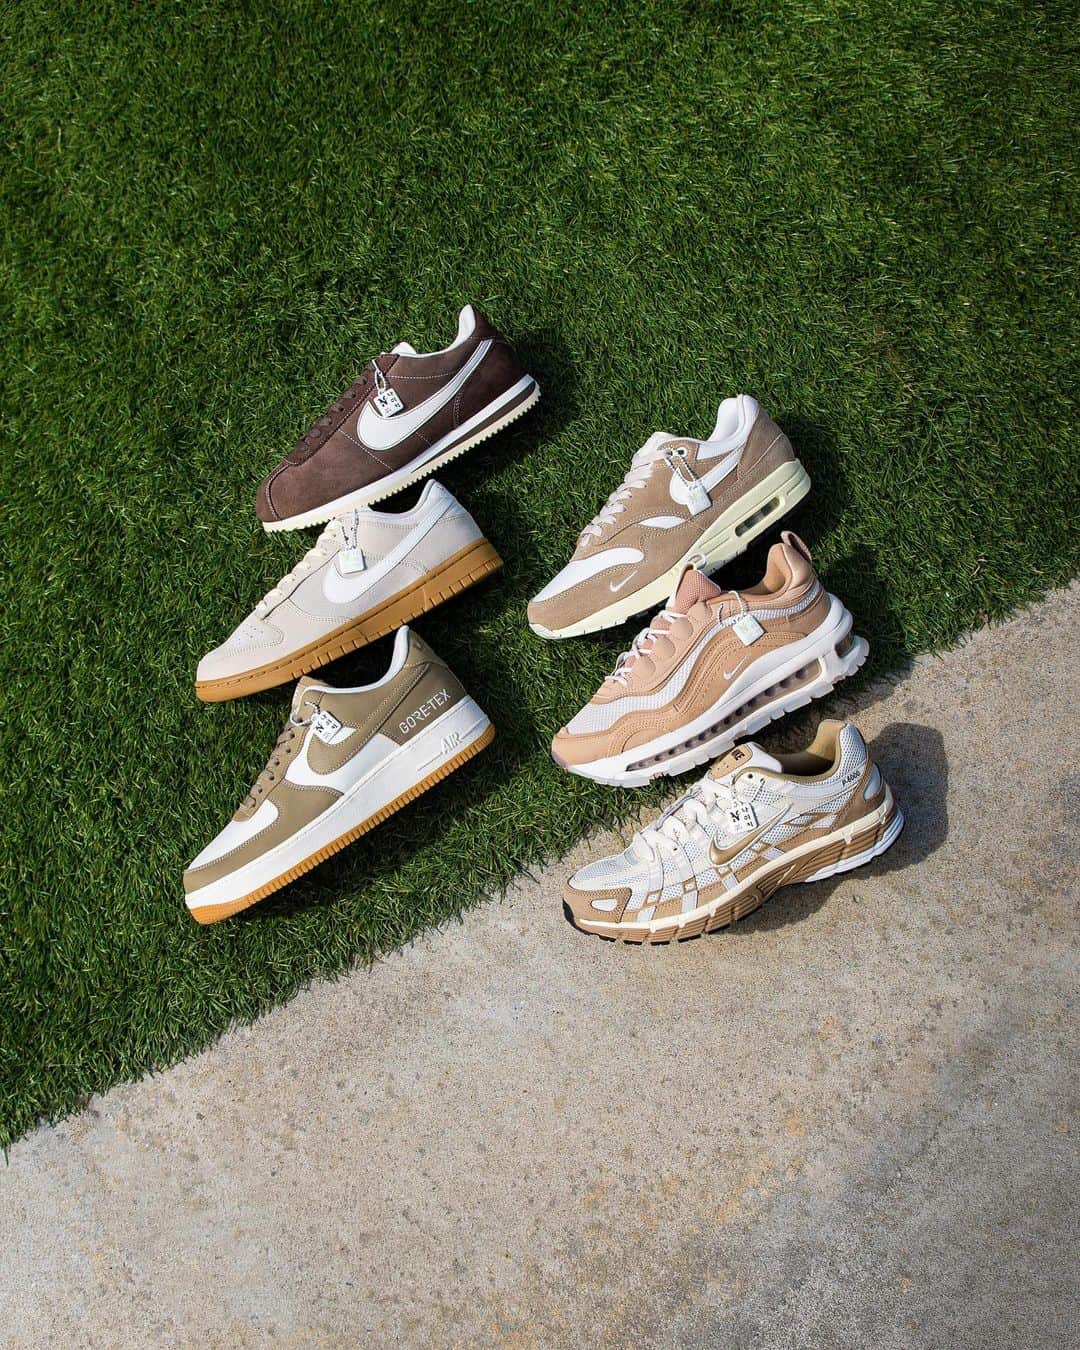 Sports Lab by atmos OSAKAのインスタグラム：「. ↓↓↓ 10/15(SUN)RELEASE NIKE AIR FORCE 1 GTX fq8142-133 ¥22,000-(tax included) SIZE : 25.5cm〜30.0cm  NIKE CORTEZ SE fq8144-237 ¥12,100-(tax included) SIZE : 25.5cm〜30.0cm  NIKE P-6000 PRM fq8243-025 ¥15,400-(tax included) SIZE : 23.0cm〜29.0cm  NIKE W AIR MAX 97 FUTURA SE fq8145-200 ¥24,200-(tax included) SIZE : 23.0cm〜25.0cm  NIKE W DUNK LOW SE fq8147-104 ¥15,400-(tax included) SIZE : 26.0cm〜30.0cm  NIKE W AIR MAX 1 '87 SE fq8150-133 ¥19,800-(tax included) SIZE : 26.0cm〜30.0cm」